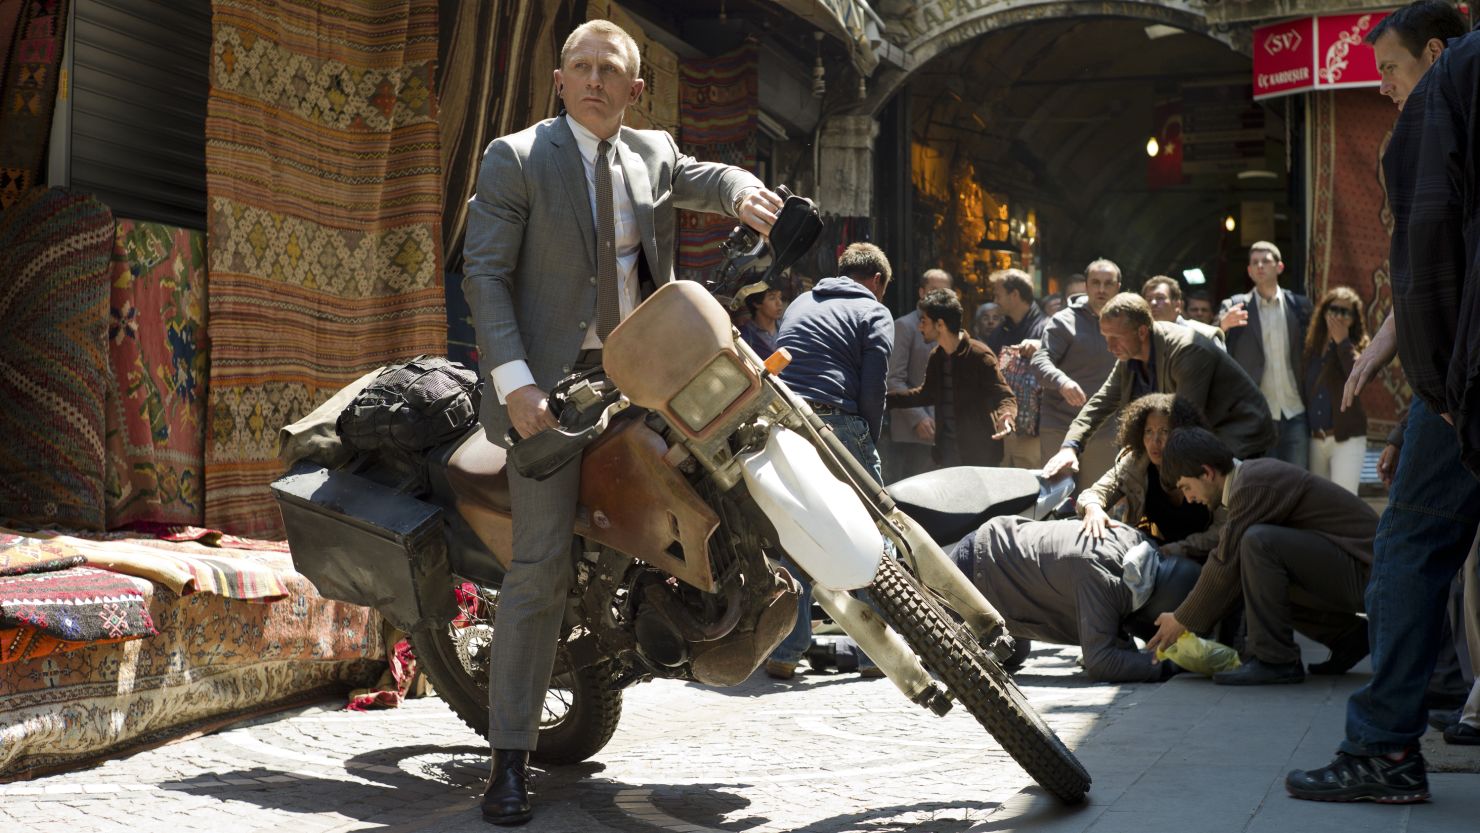 As James Bond, actor Daniel Craig pulls off all types of feats in "Skyfall."